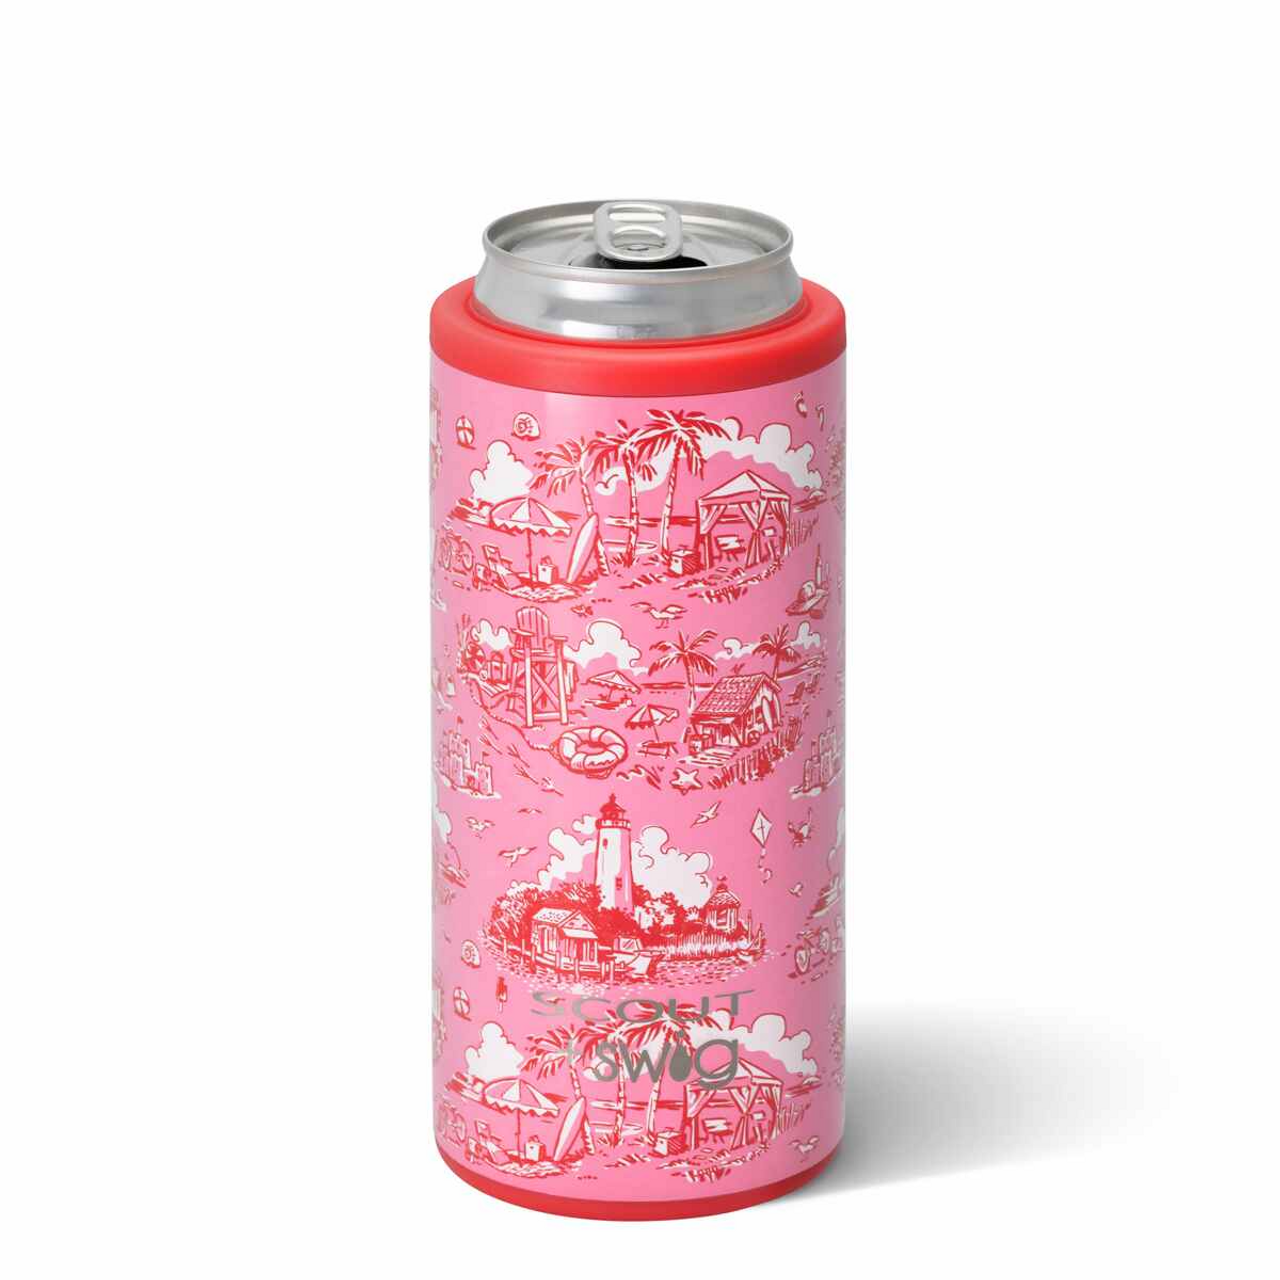 SCOUT+Swig 12 Oz Skinny Can Cooler: Beachy Keen - Off the Racks Boutique